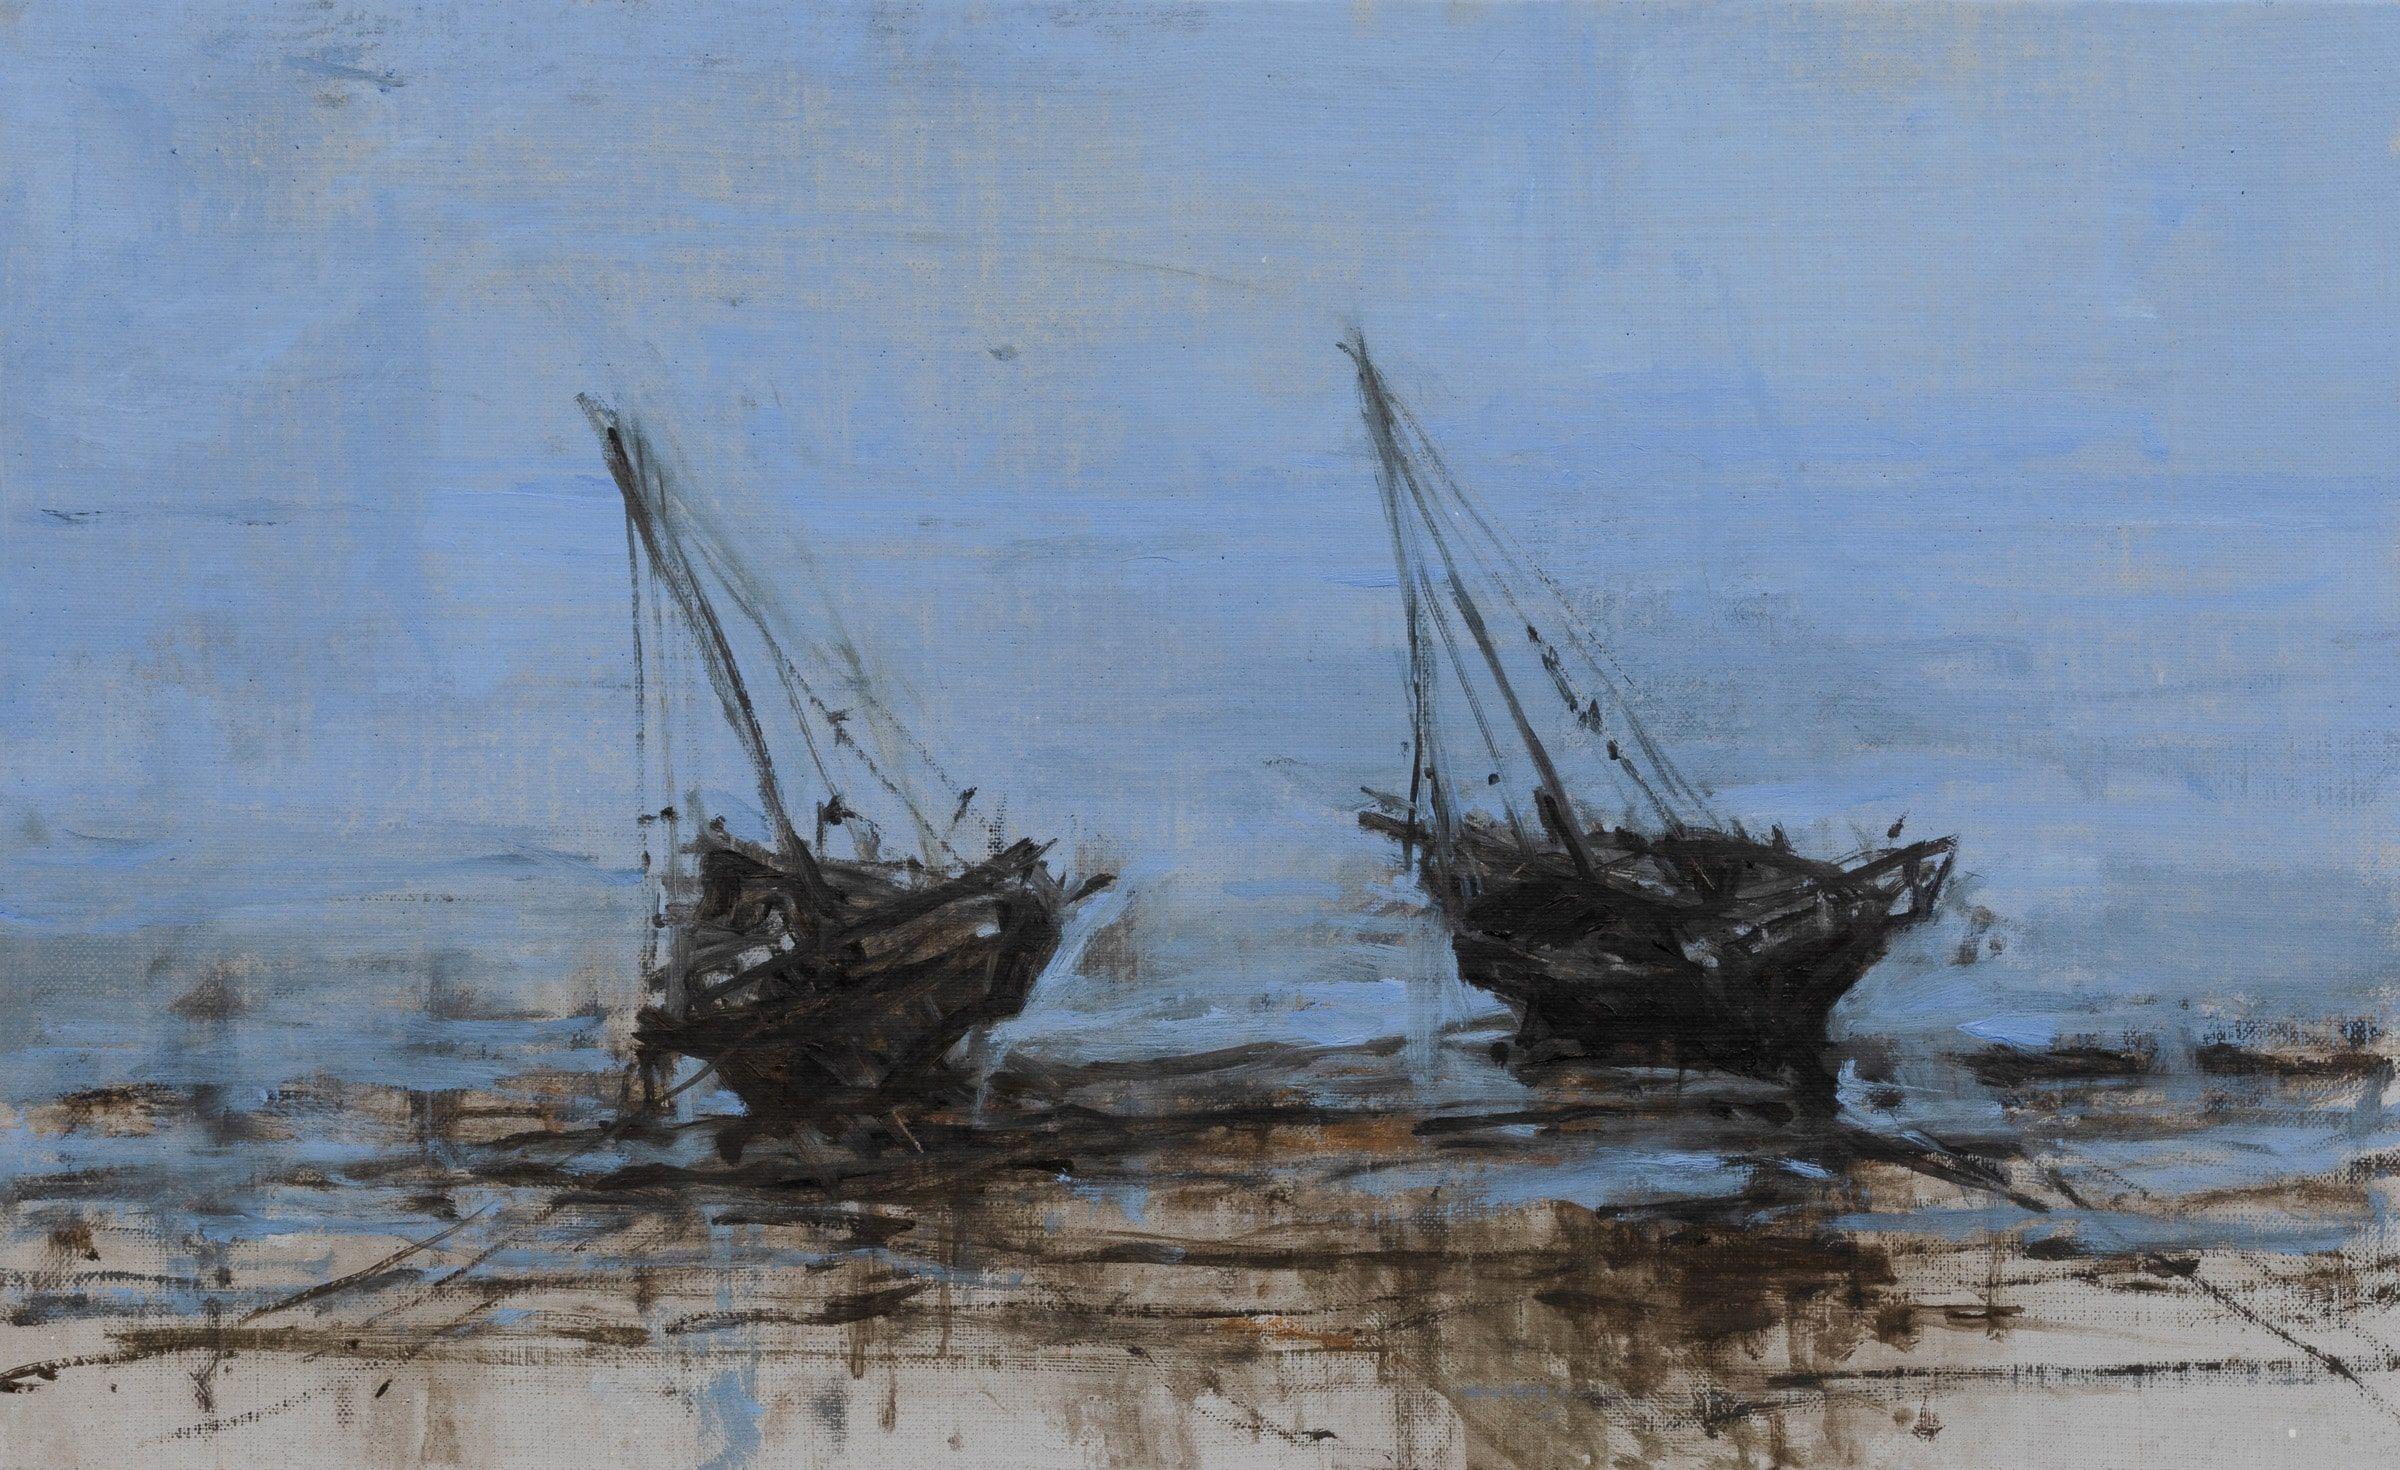 Boat in Dar es Salam n°2 is a unique oil on canvas painting by Spanish contemporary artist Calo Carratalá, dimensions are 36 × 59 cm (14.2 × 23.2 in). 
The artwork is signed and comes with a certificate of authenticity.

Contemporary painter Calo